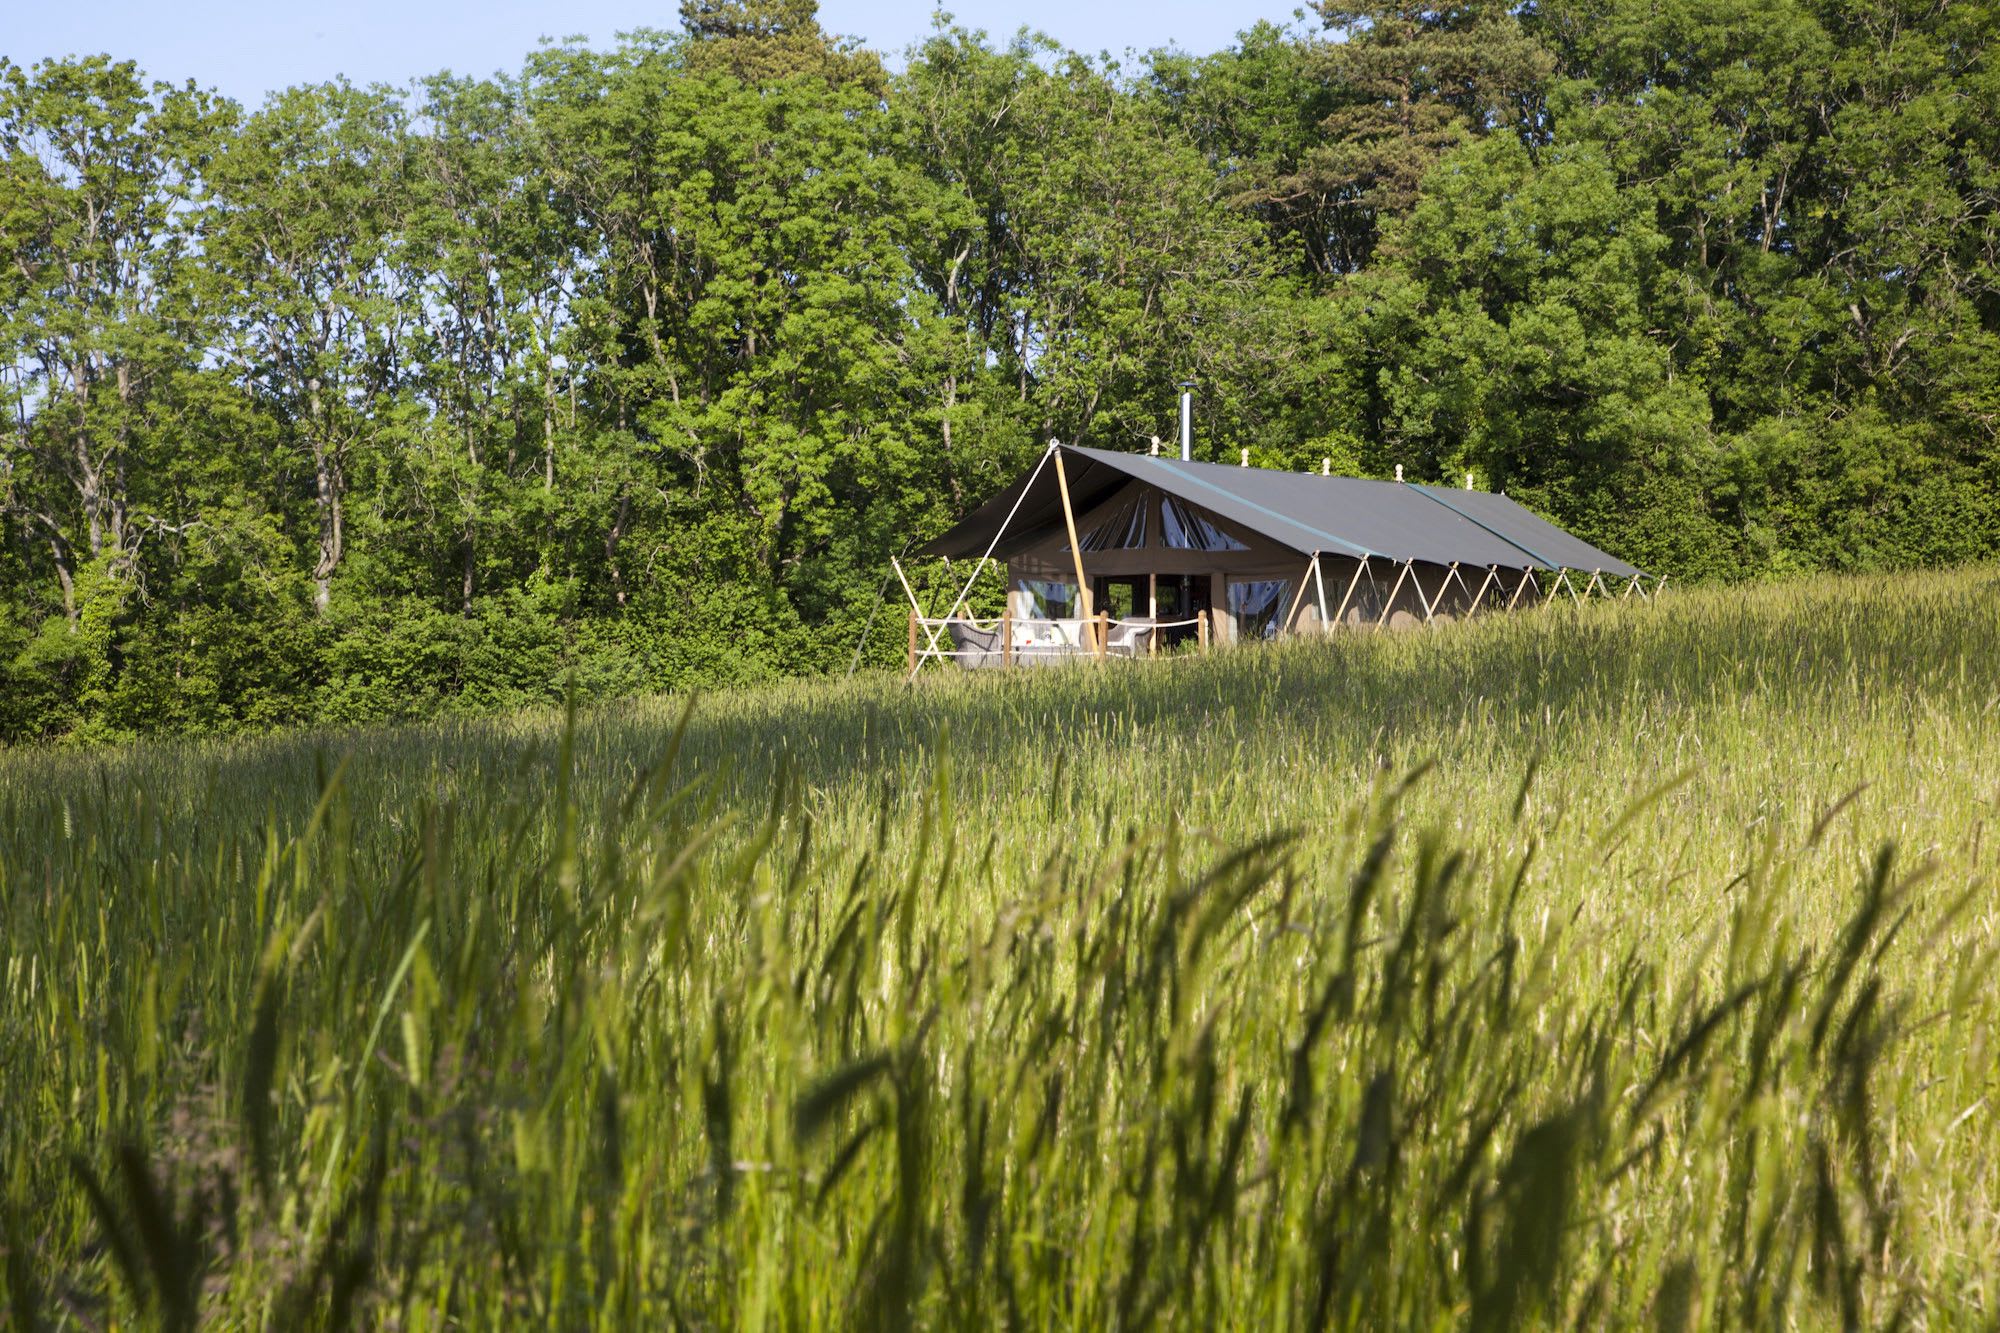 Reconnect with nature in a spacious safari tent, overlooking the hilly downlands of Hampshire’s Meon Valley.